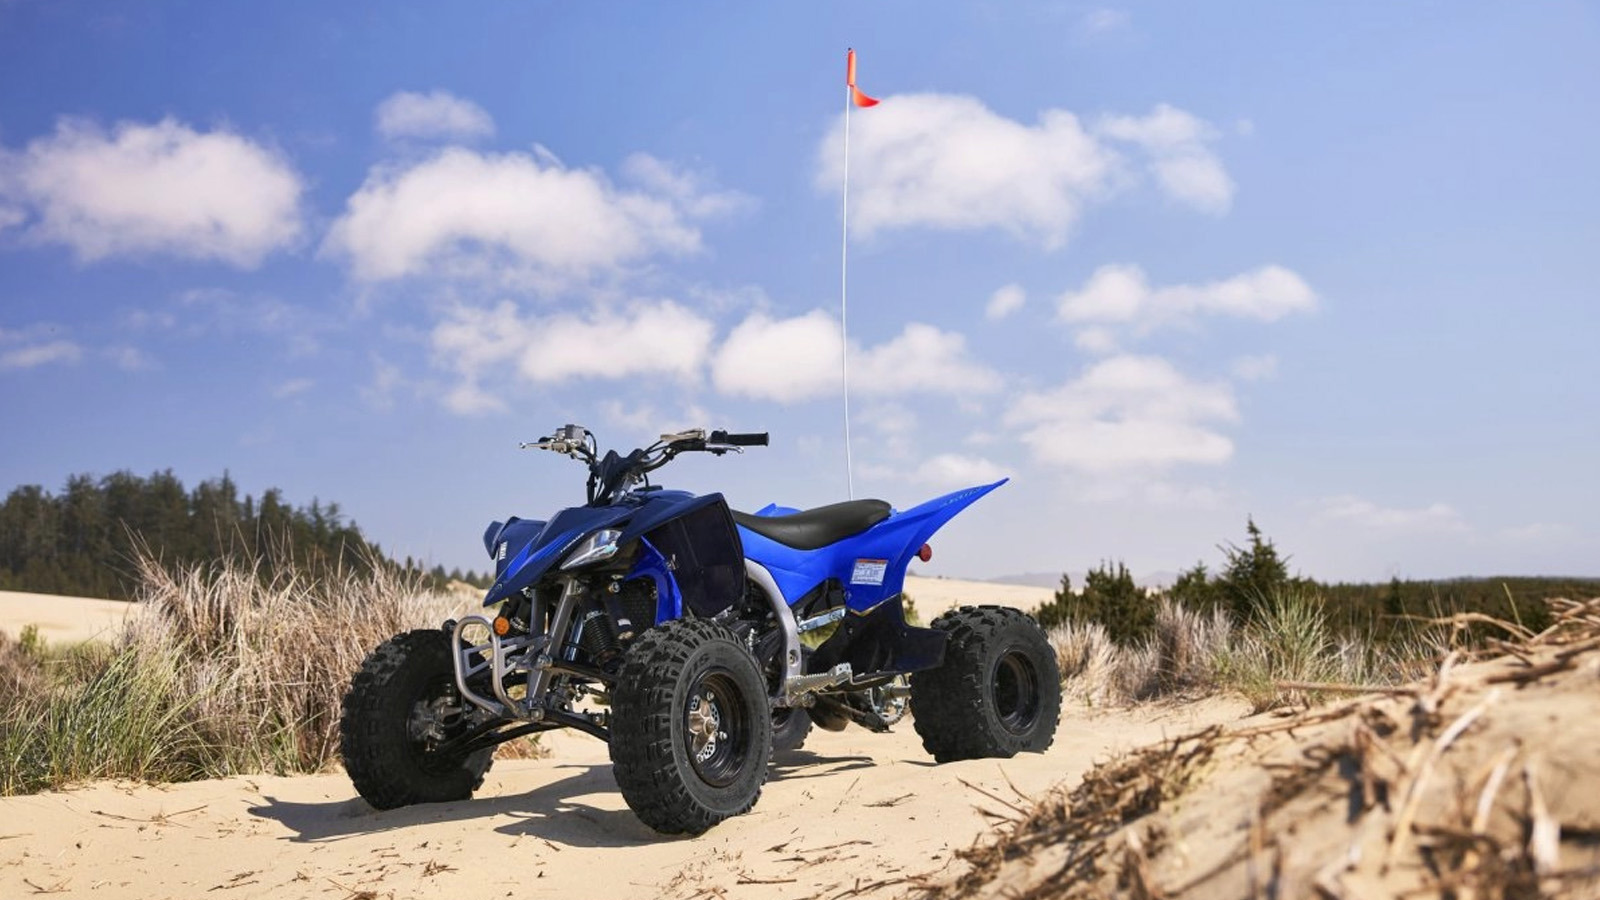 Yamaha YFZ450R Vs. Raptor 700: What's The Difference & Which Is Better For You?